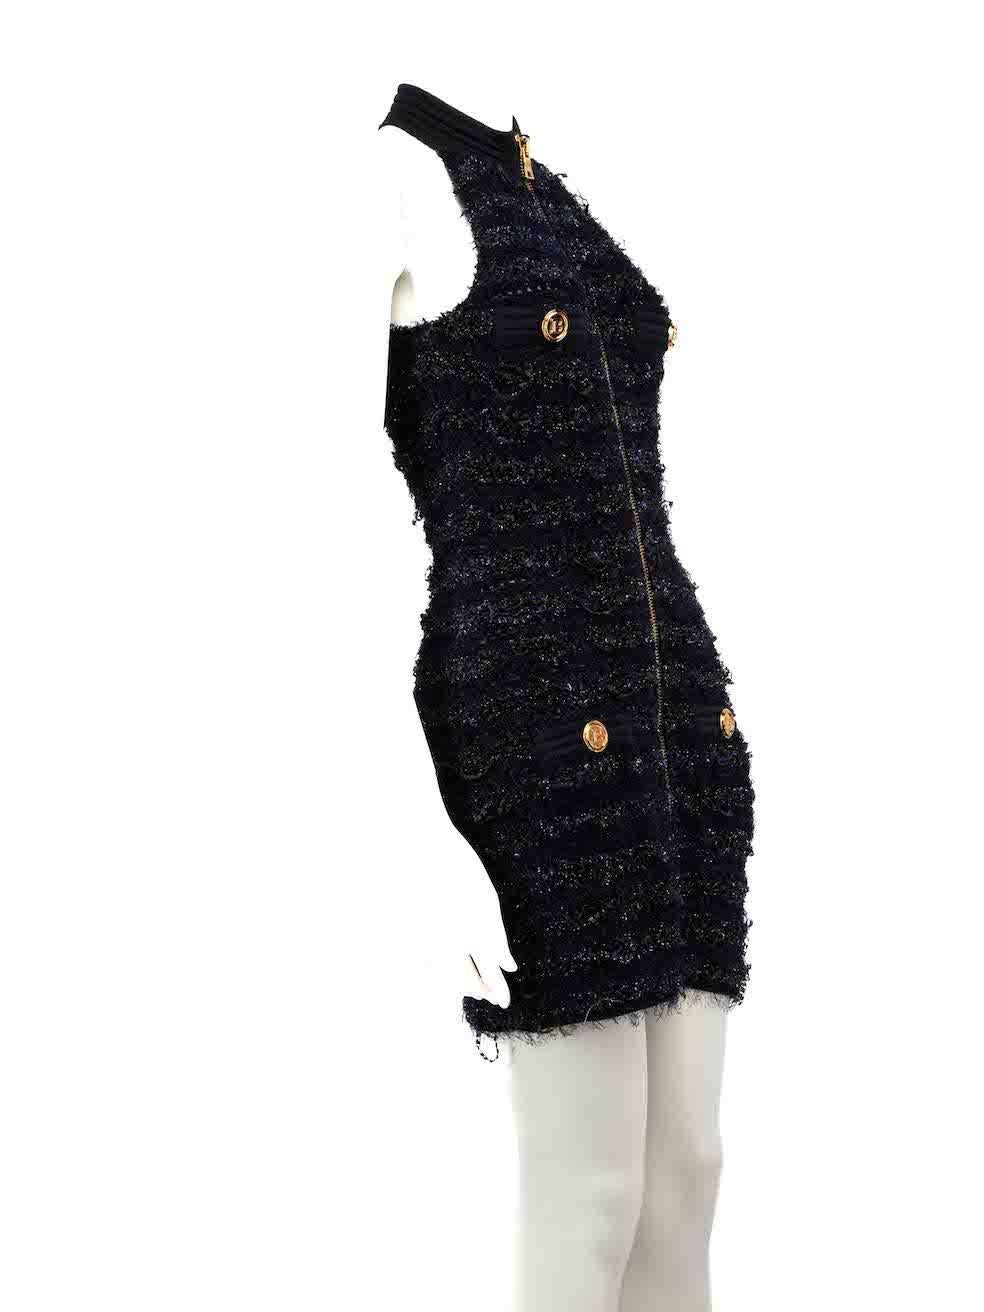 CONDITION is Very good. Minimal wear to dress is evident. Minimal pull to tweed on the back of dress on this used Balmain designer resale item. Please note the ribbed neck is deliberately distressed.
 
 
 
 Details
 
 
 Navy
 
 Tweed
 
 Mini bodycon